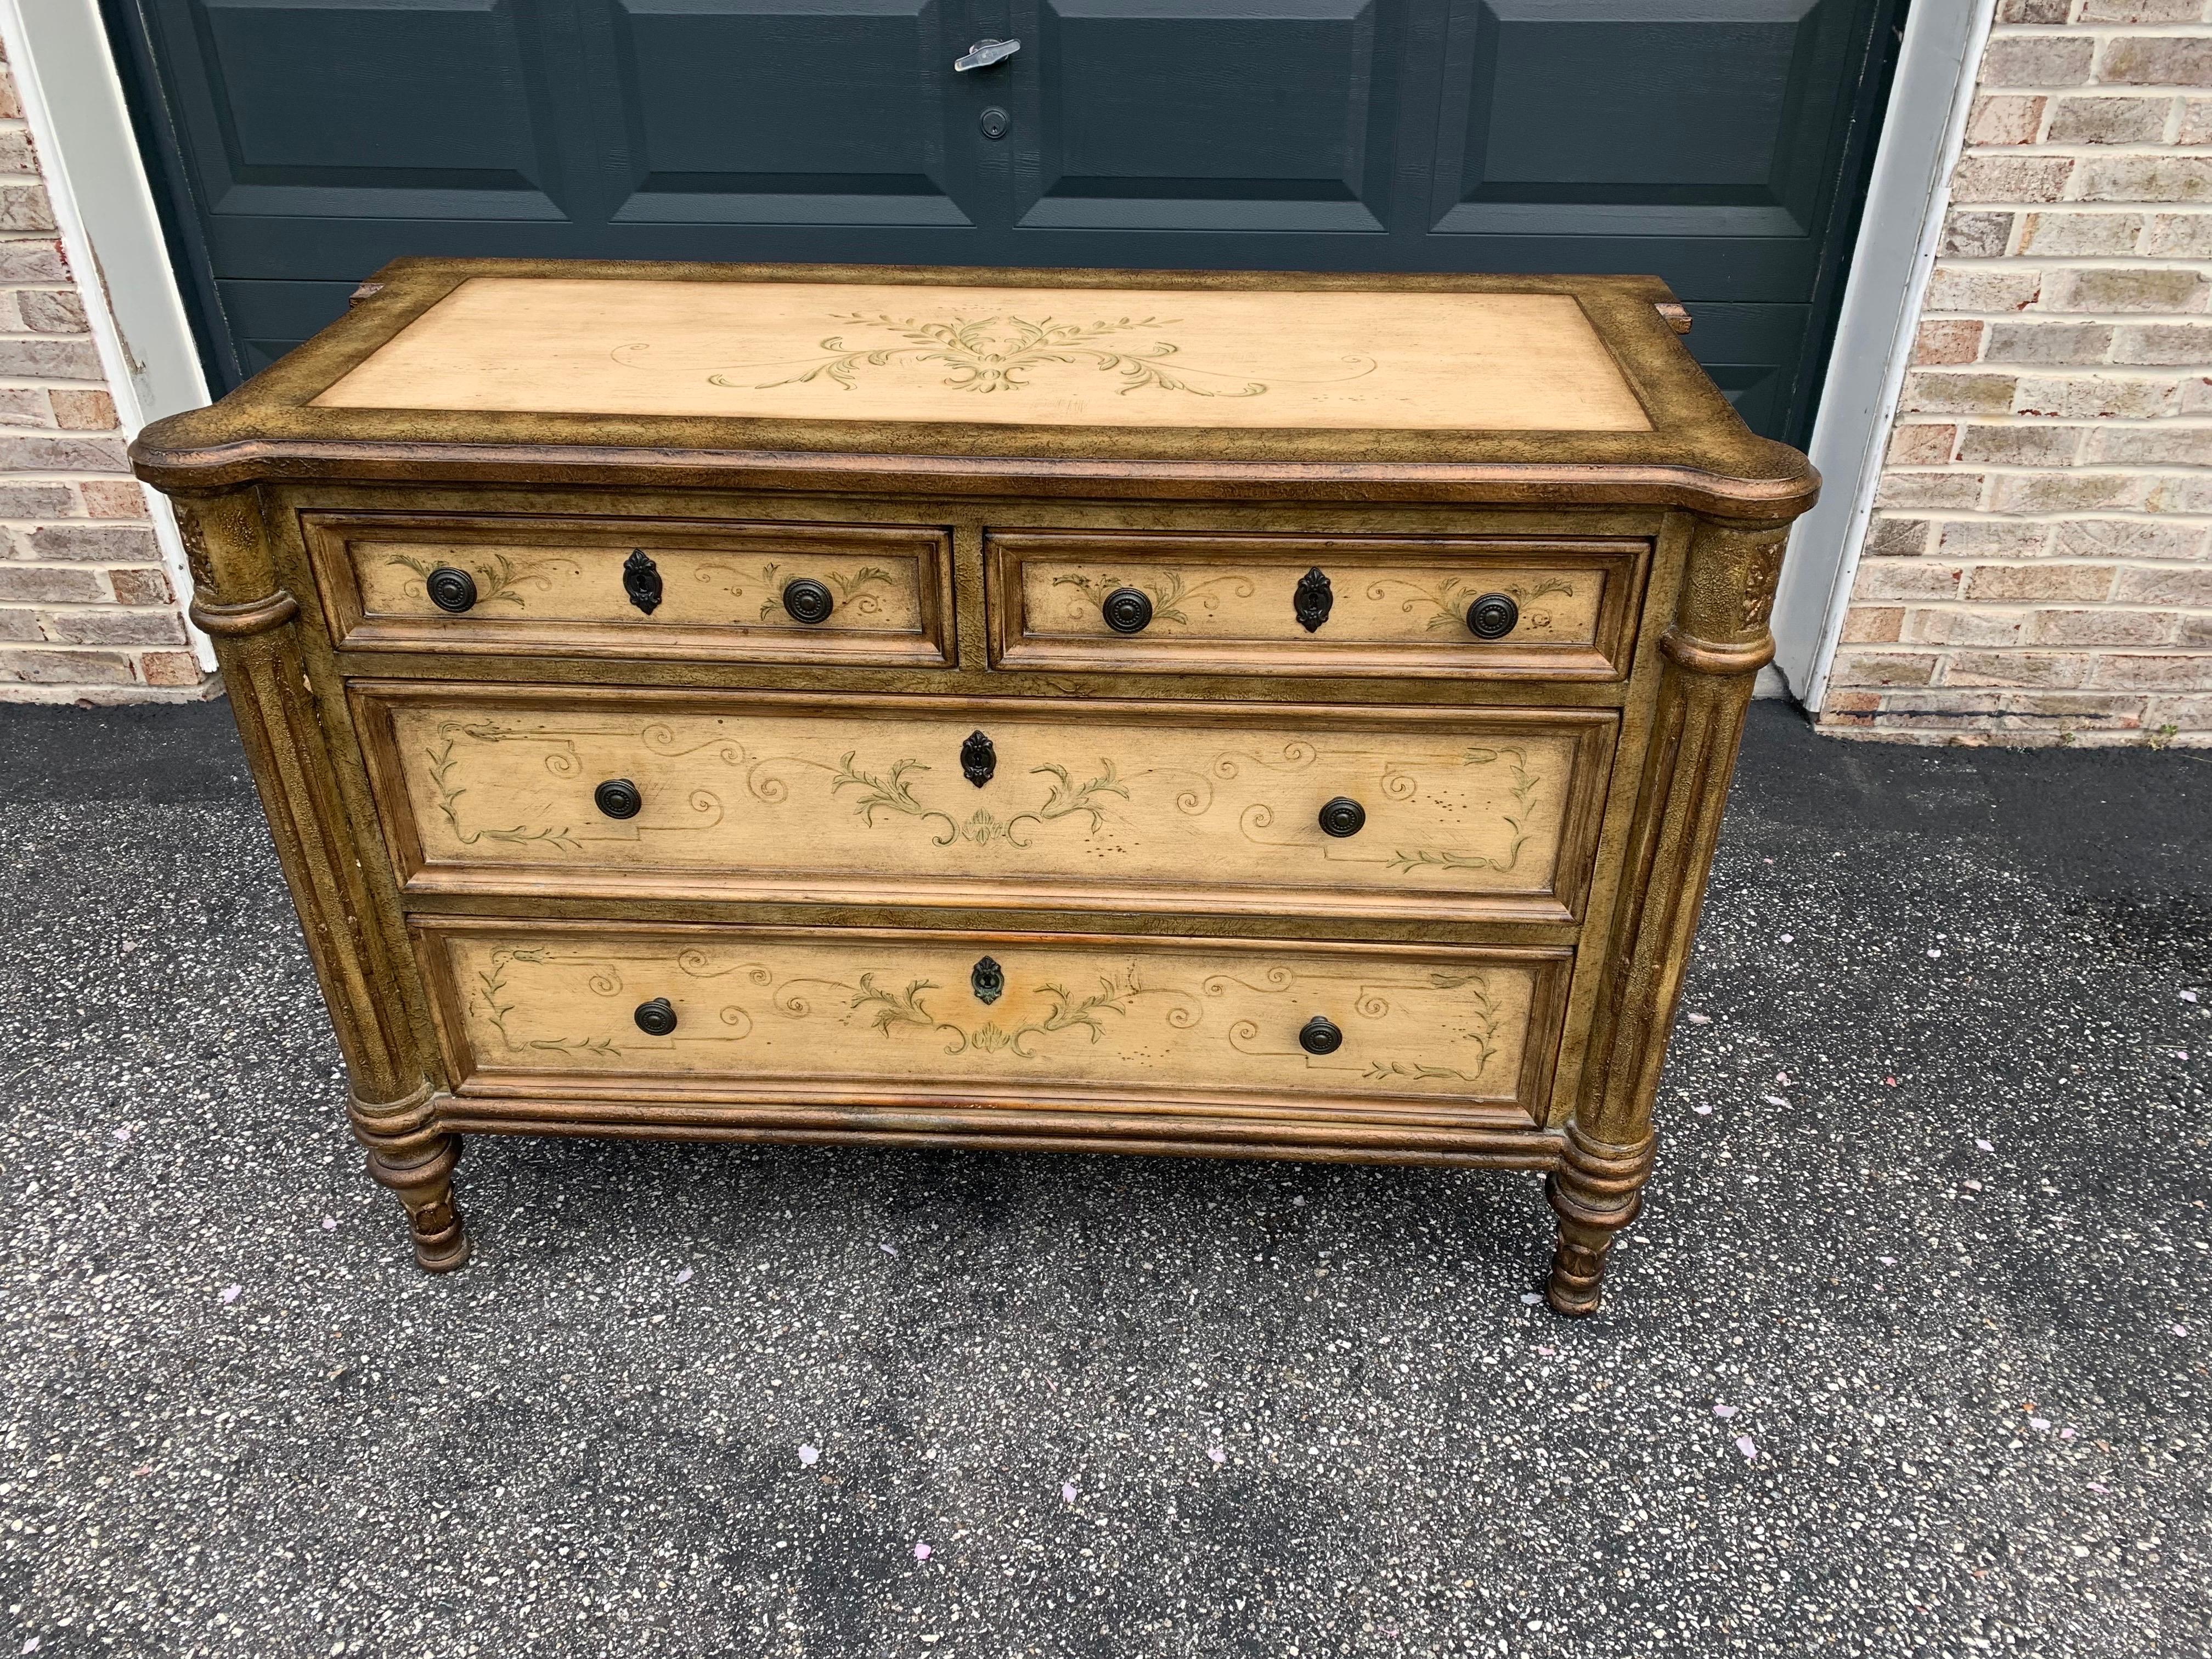 Set of 2 gorgeous painted dressers. There are two smaller drawers that sit above two larger drawers. Gold accents throughout. These are even more stunning in person! Can be used as dressers, larger nightstands, accent tables, foyer tables- they are